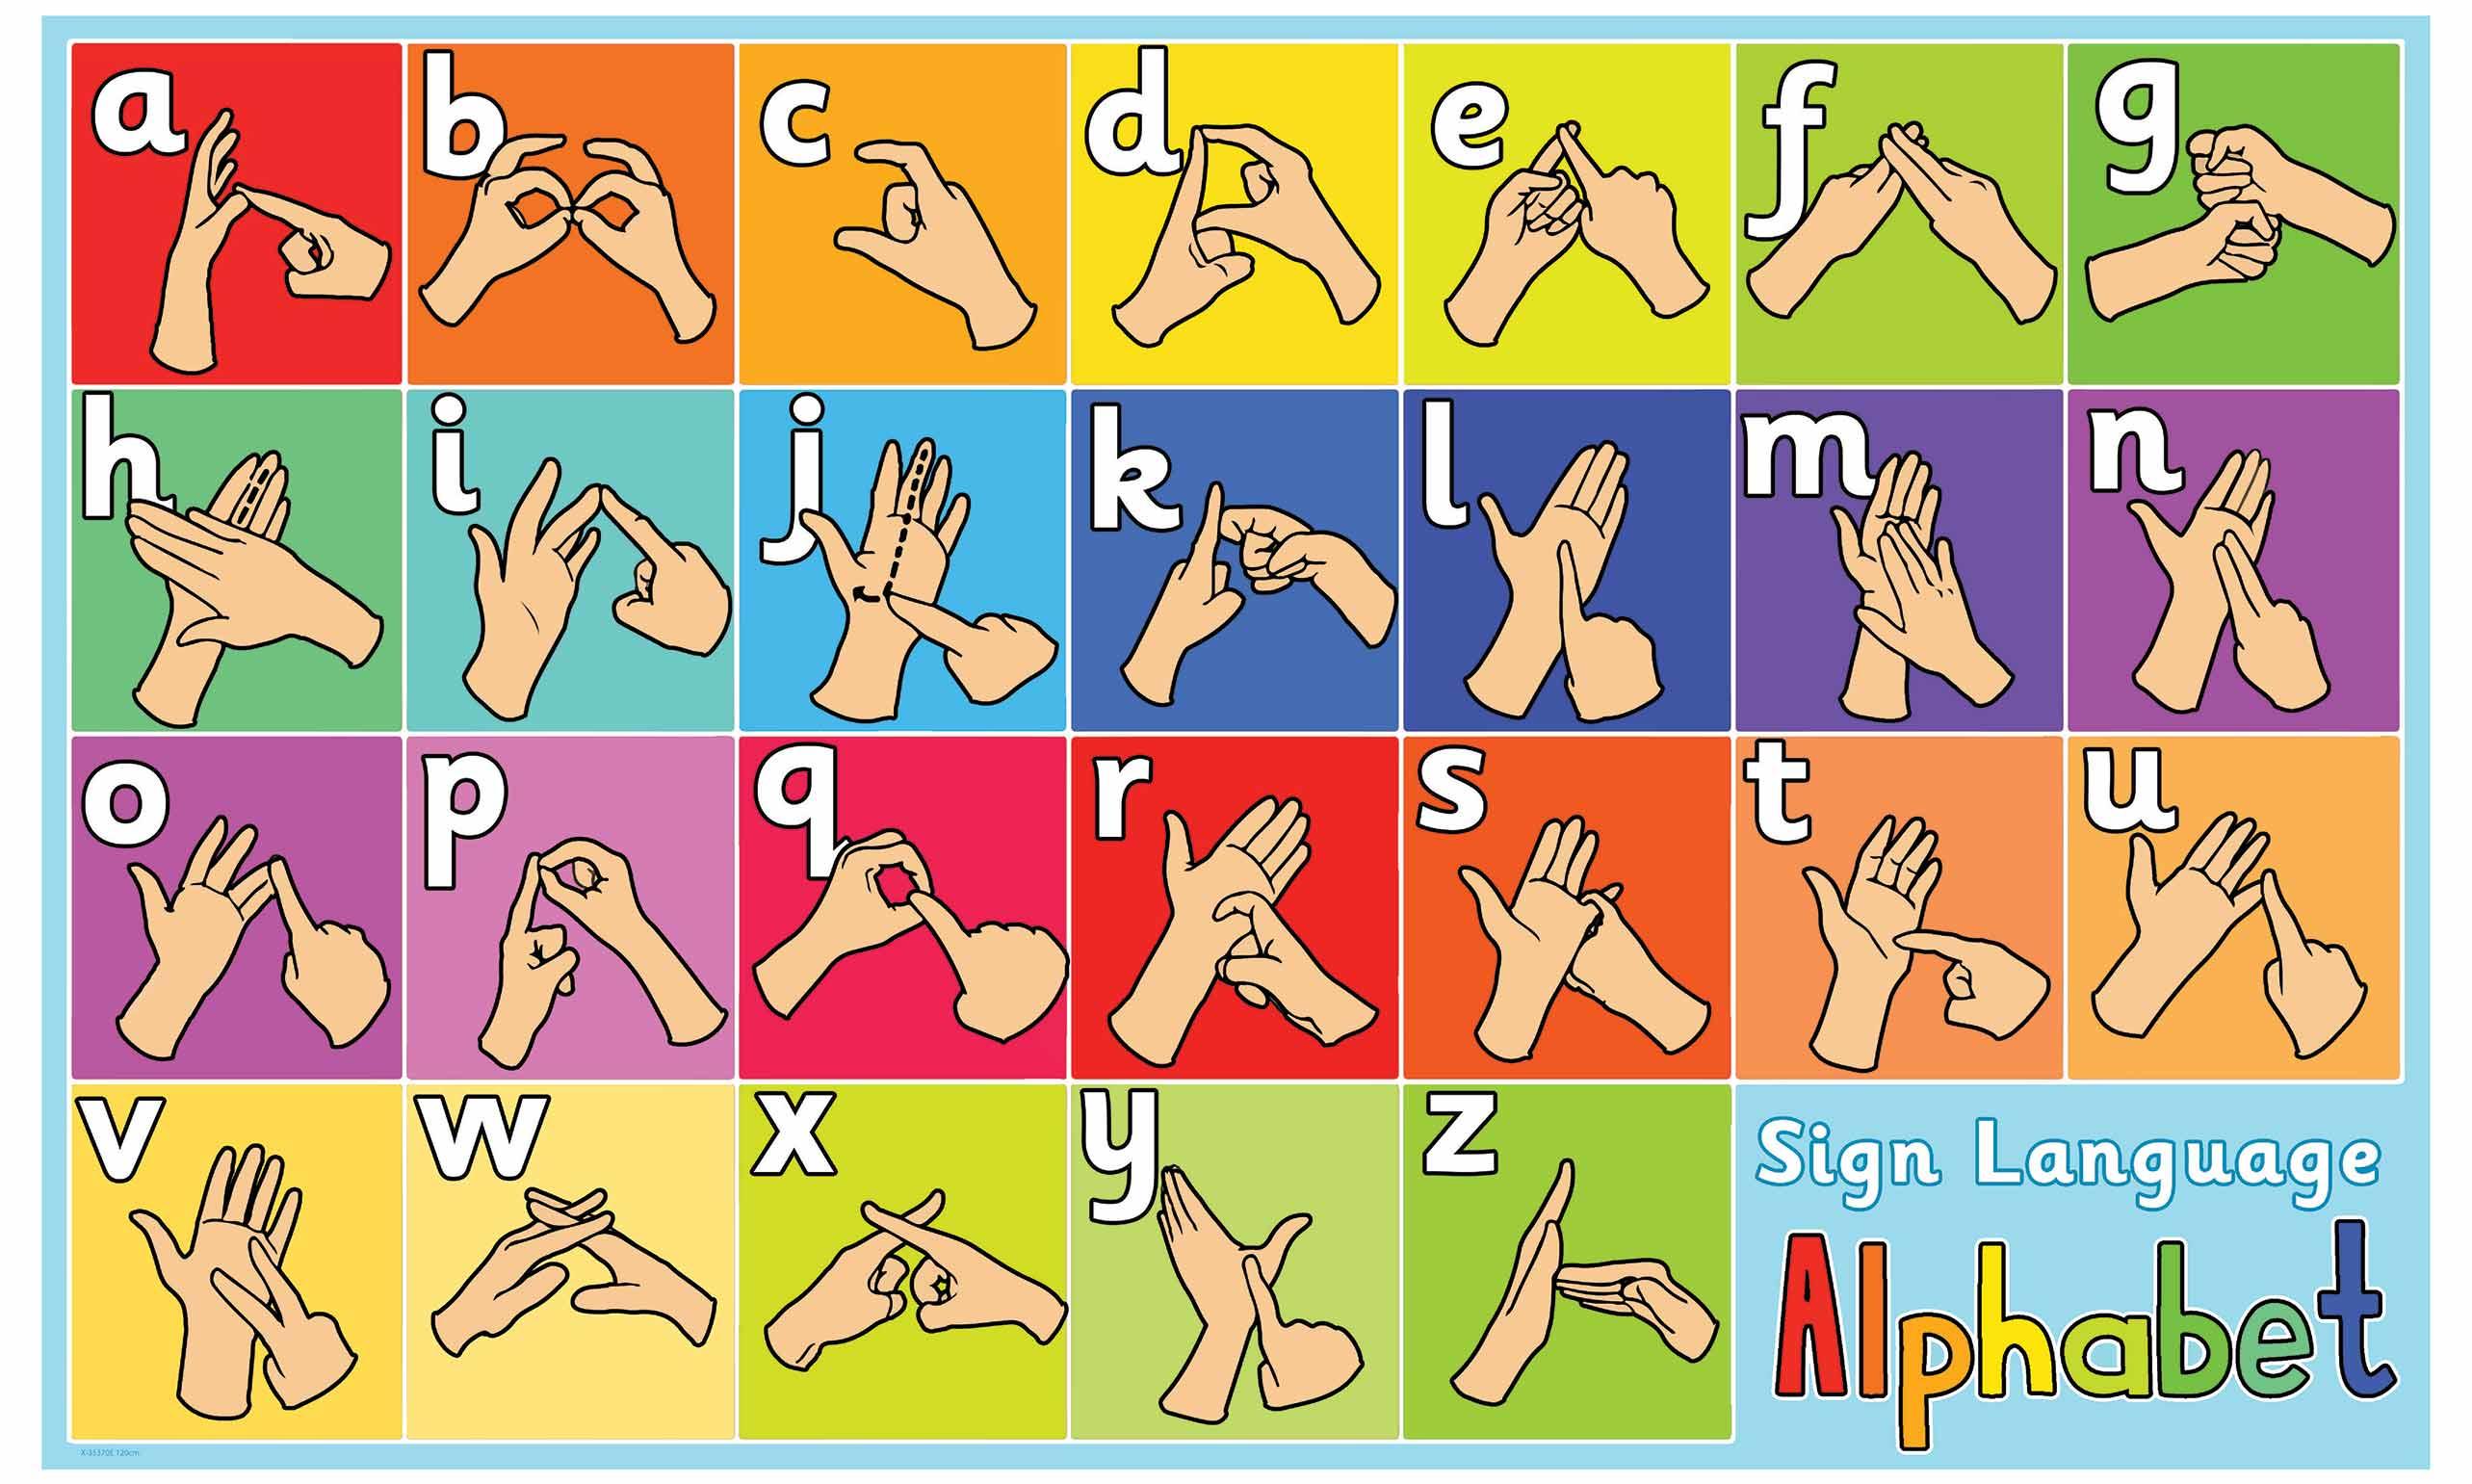 How To Sign The Alphabet In British Sign Language